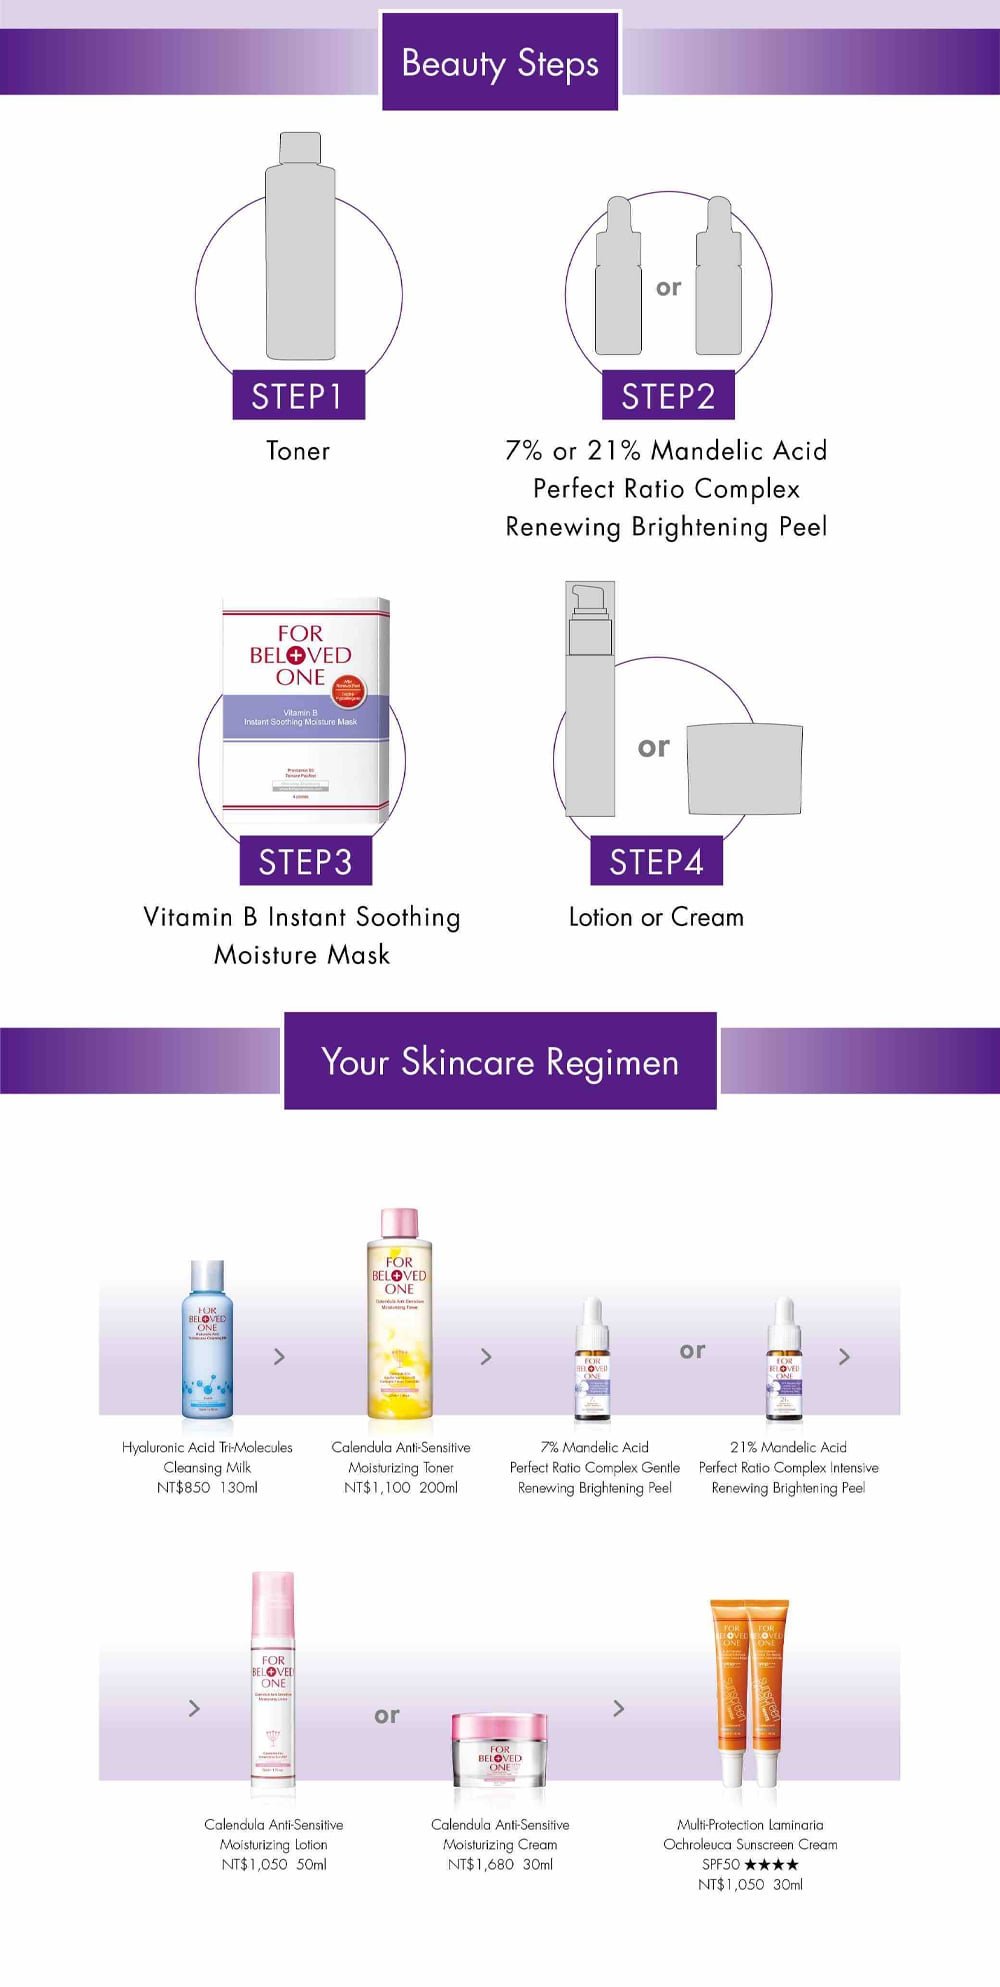 Instant Soothing Moisture Mask - Steps